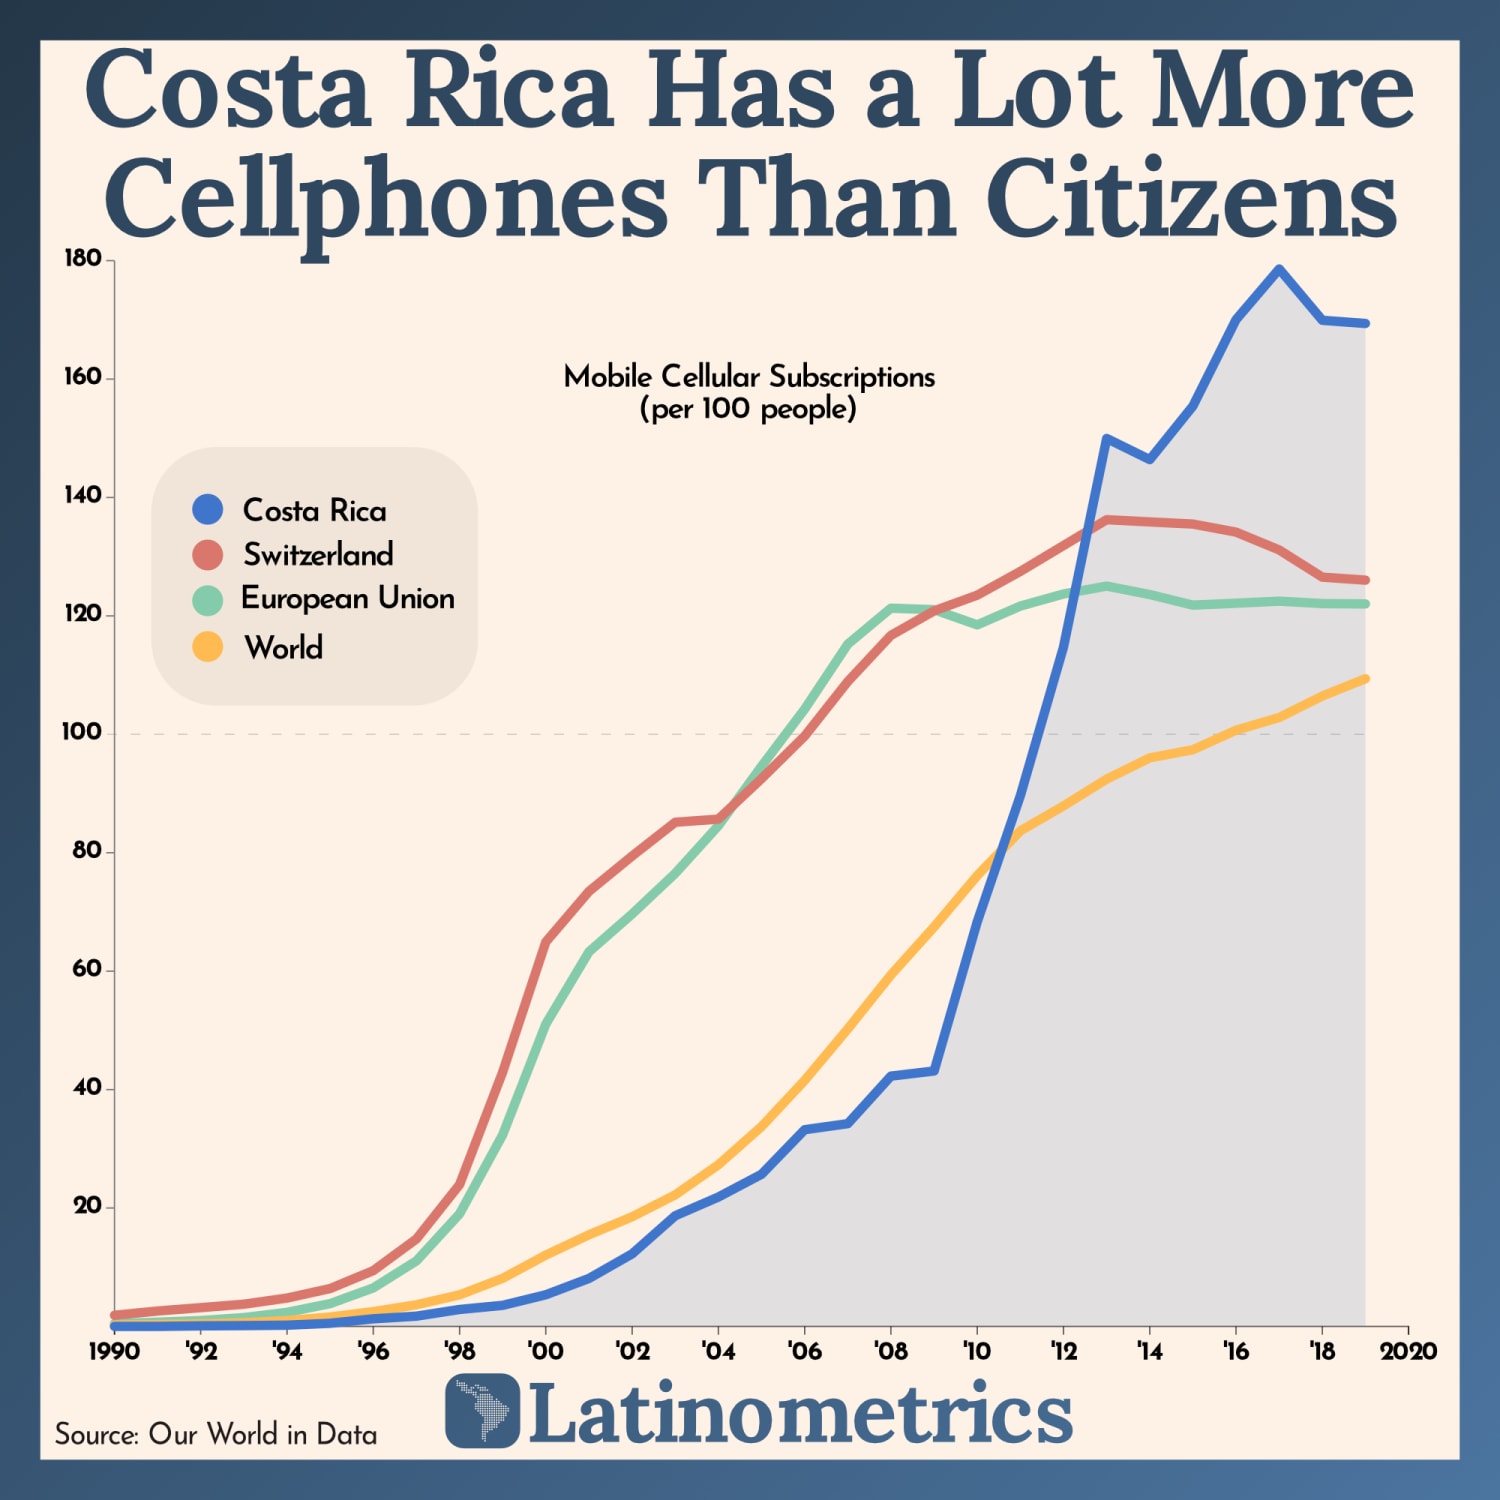 With 1.69 phone lines per person, Costa Rica is home to one of the highest mobile subscription rates in the world. How can the number of mobile phones surpass the population of a country?